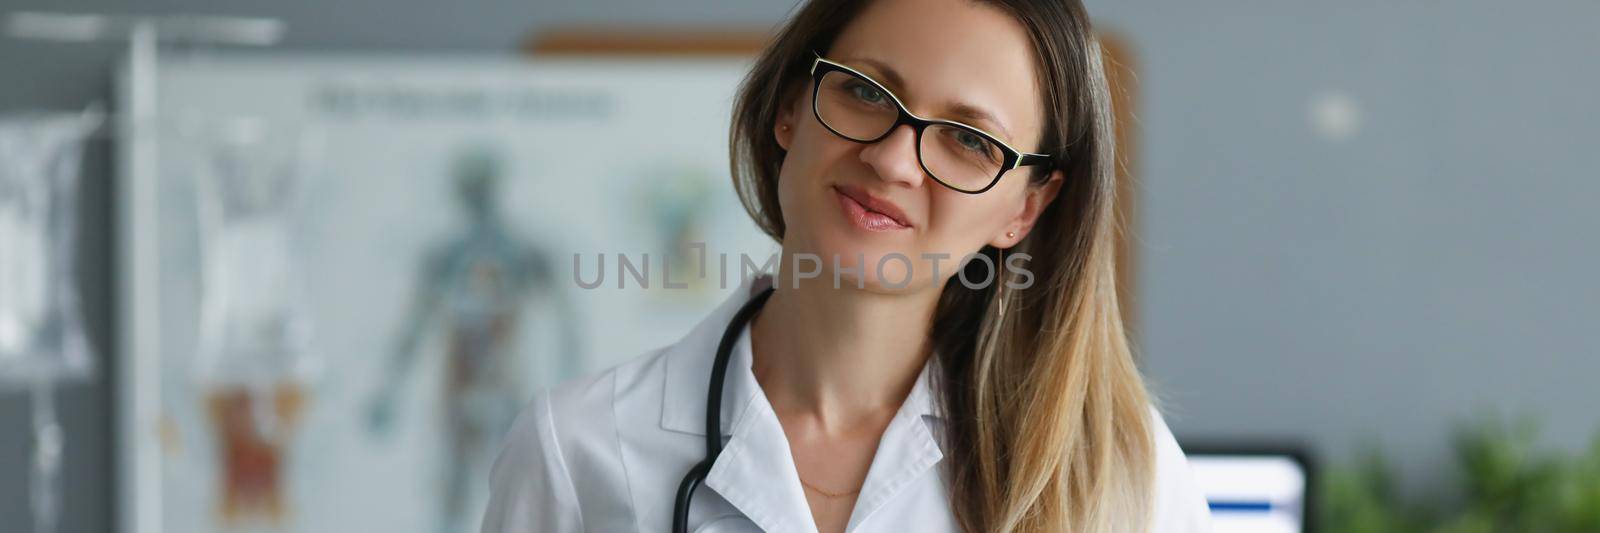 Portrait of professional medical worker posing with clipboard in clinic. Qualified doctor ready for next patient appointment. Healthcare, medicine concept